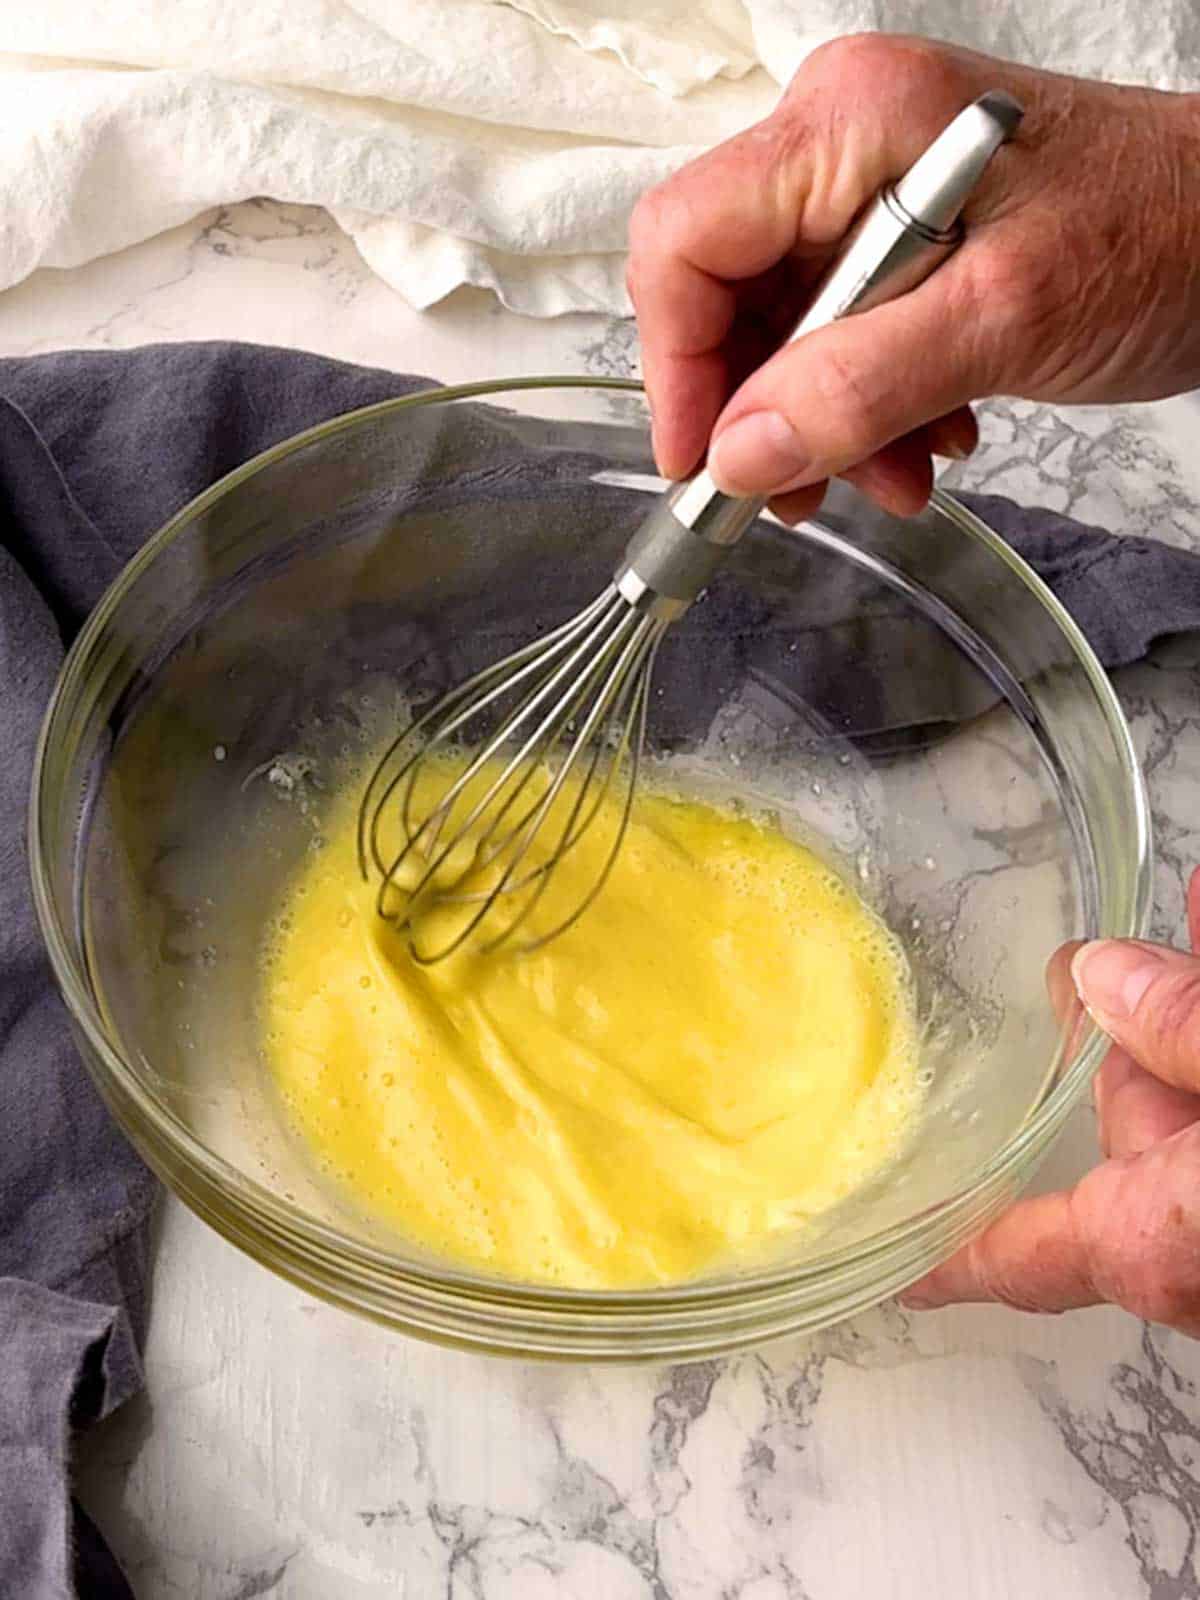 Whisking together milk, melted butter, egg, baking powder and baking soda in a bowl.